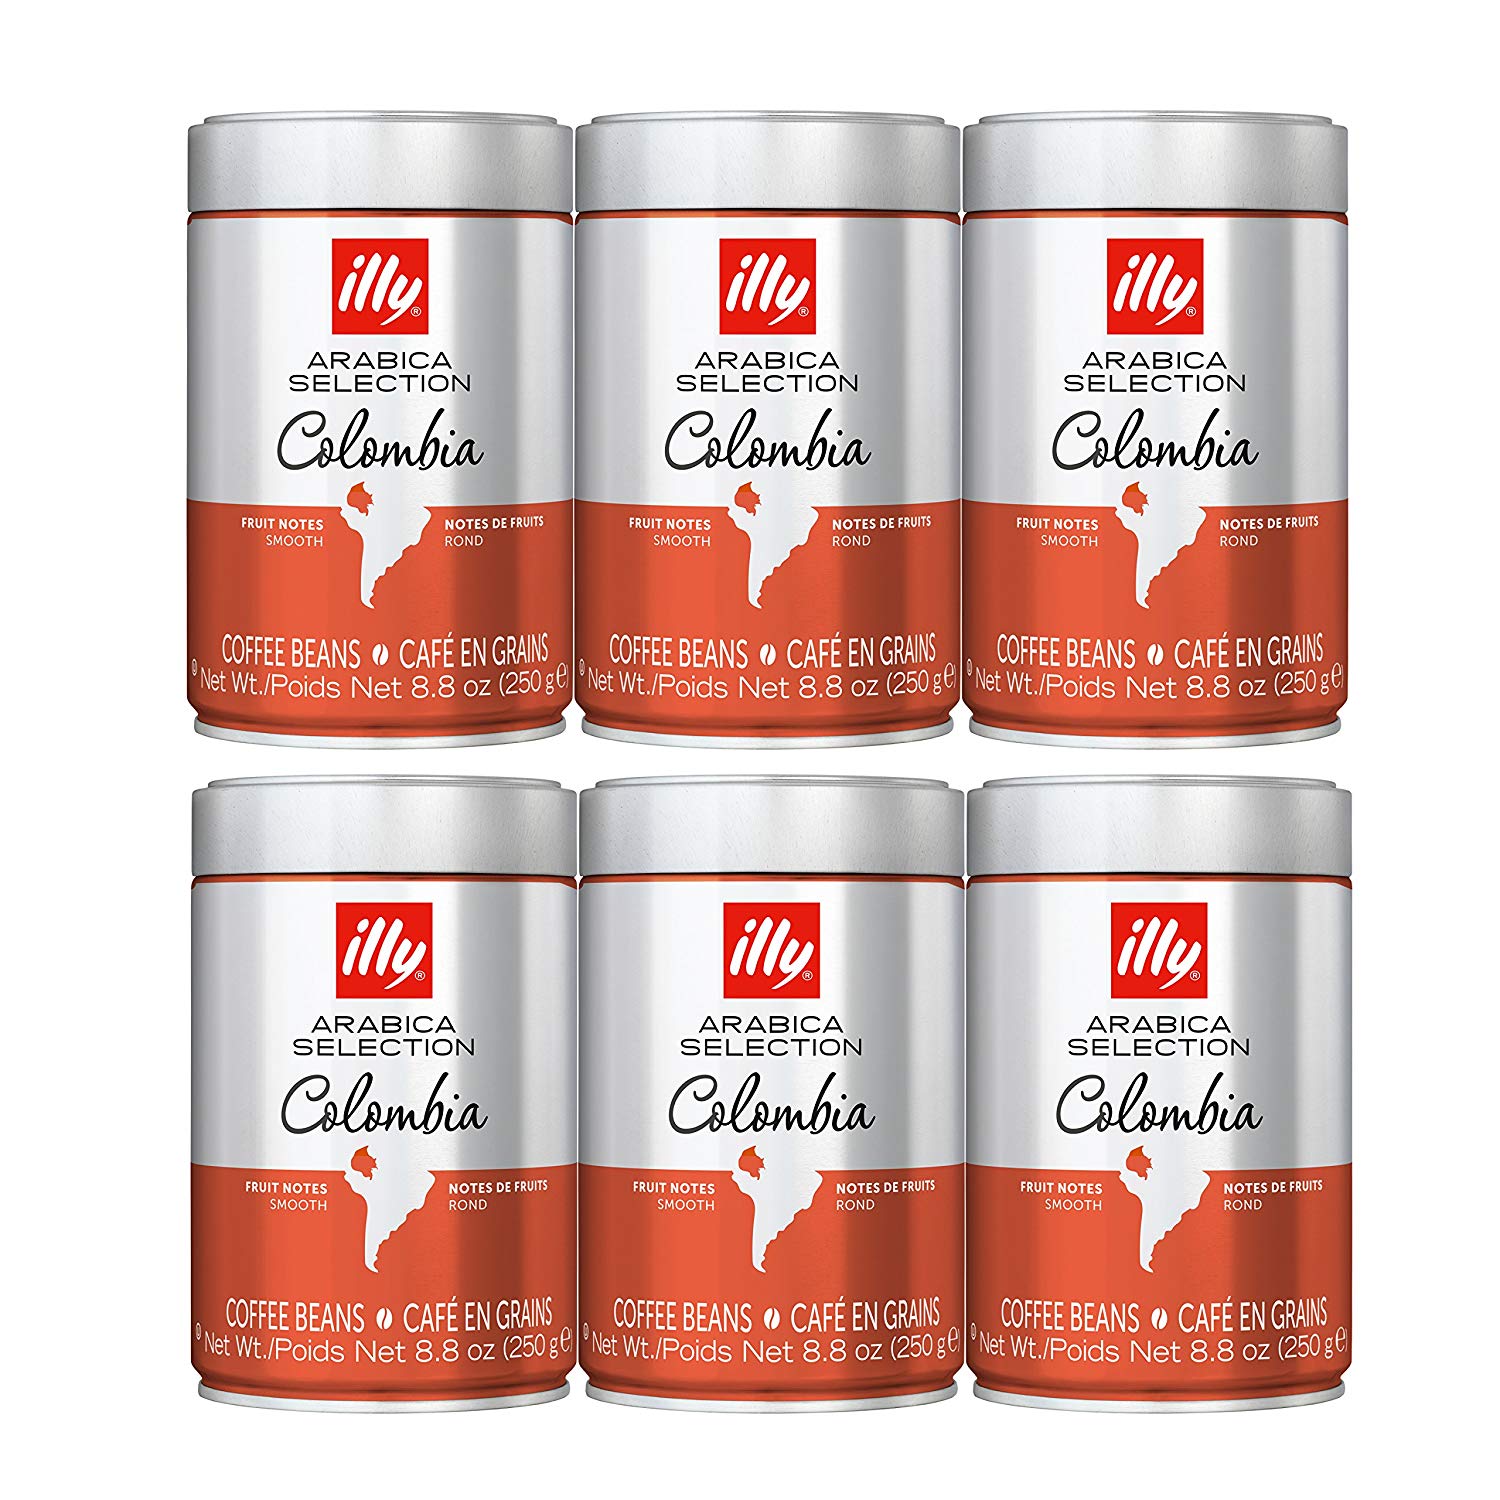 illy Arabica Selection Colombia Whole Beans 250g Tin - Case of 6 (ORANGE) - 6989